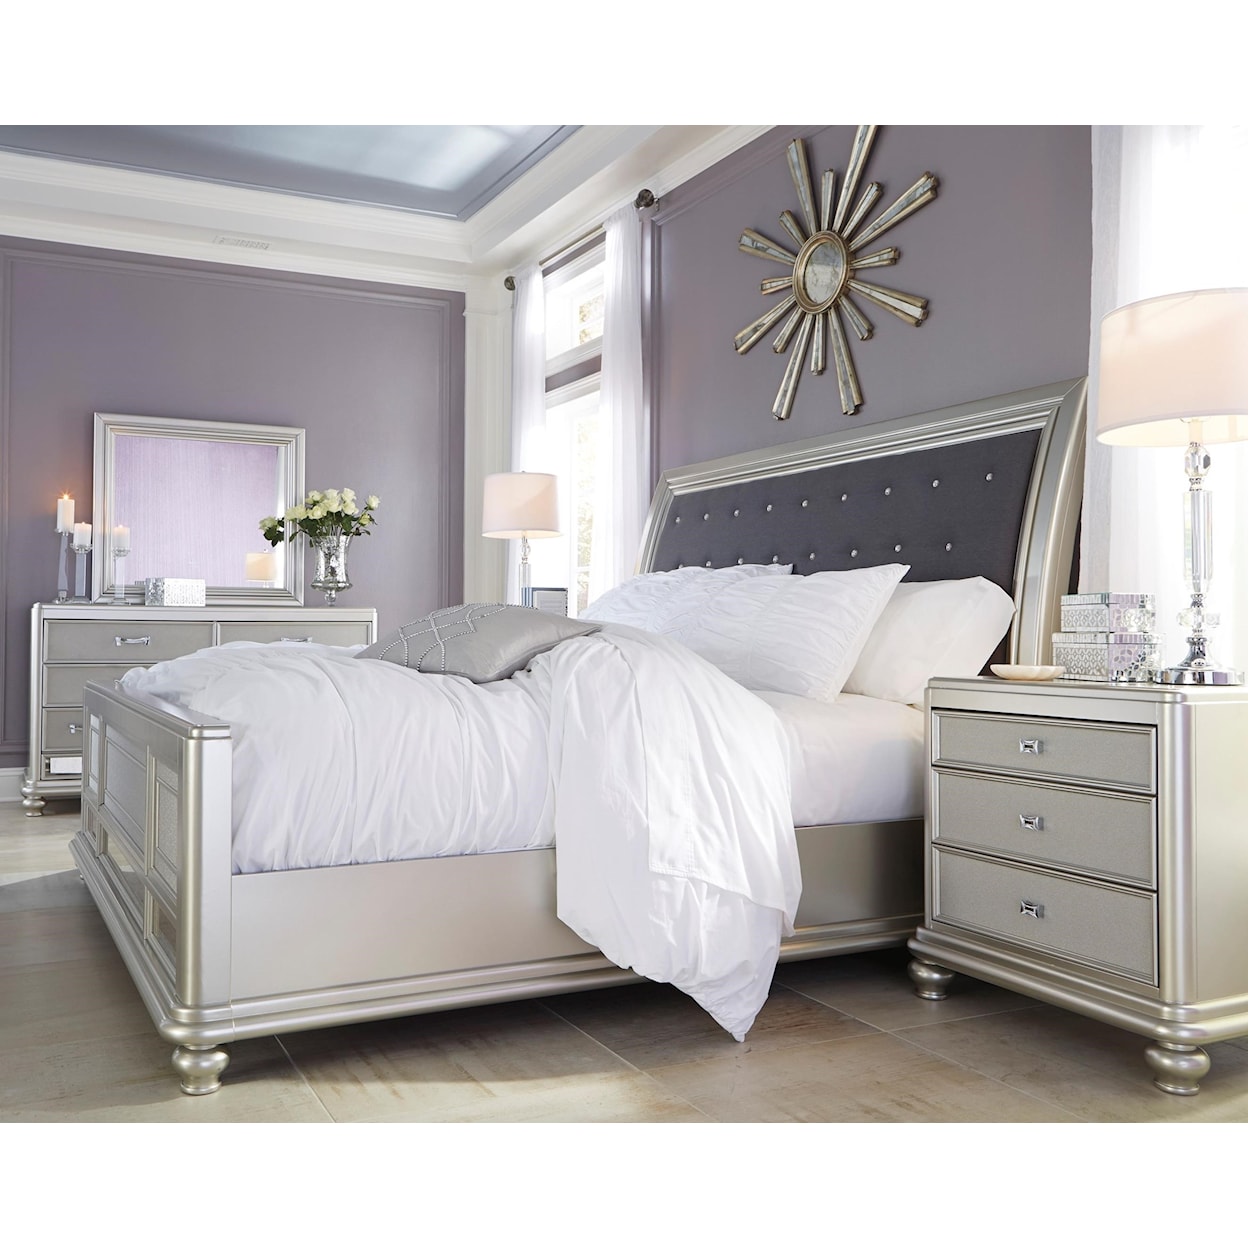 Signature Design by Ashley Coralayne King Bedroom Group